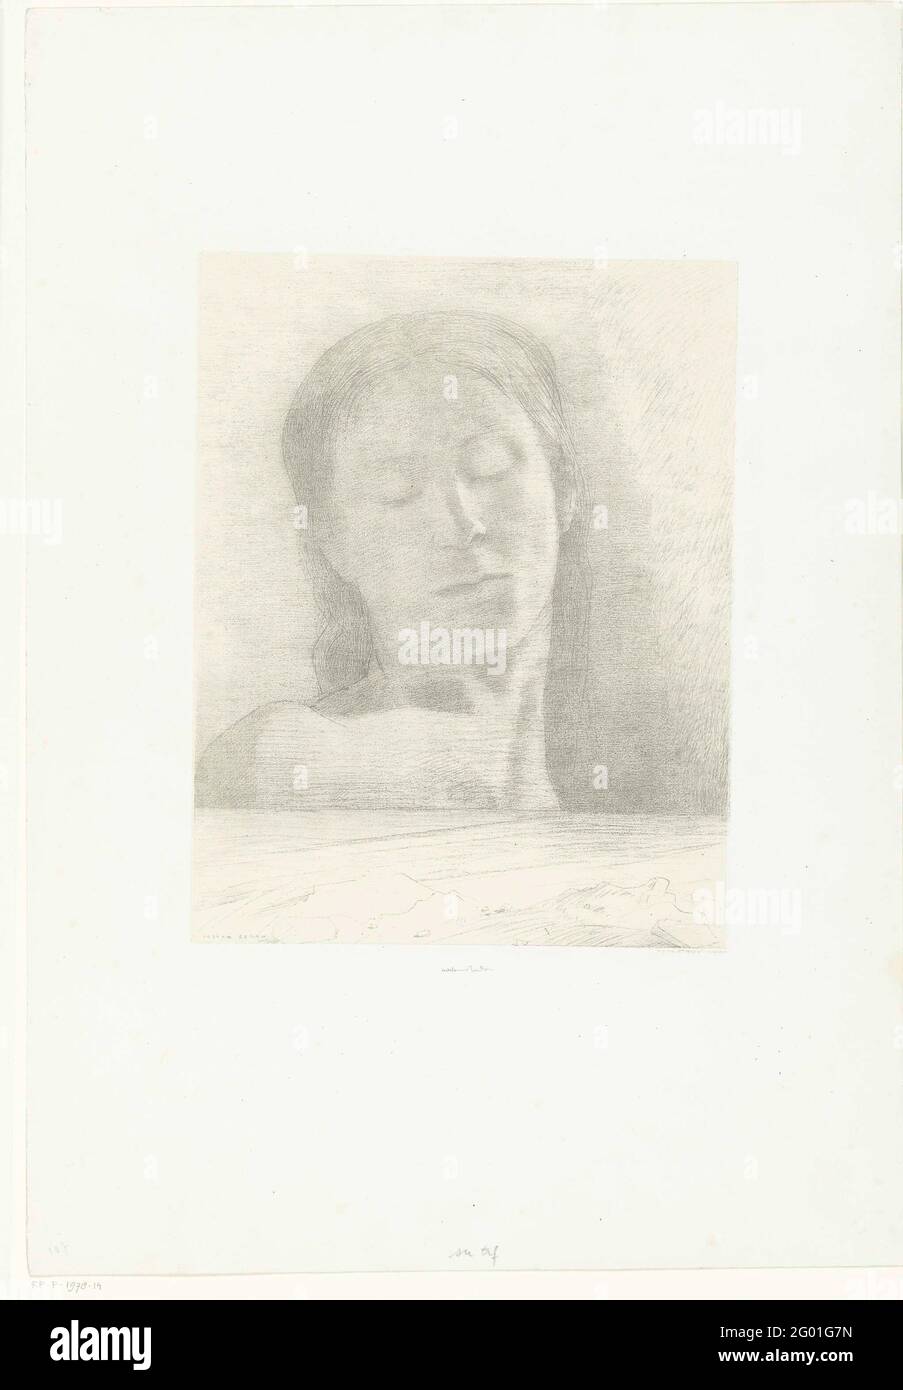 Closed eyes; Yeux Clos. Bust of an androgyne figure with closed eyes, seen from the front. At the bottom of a landscape. Stock Photo